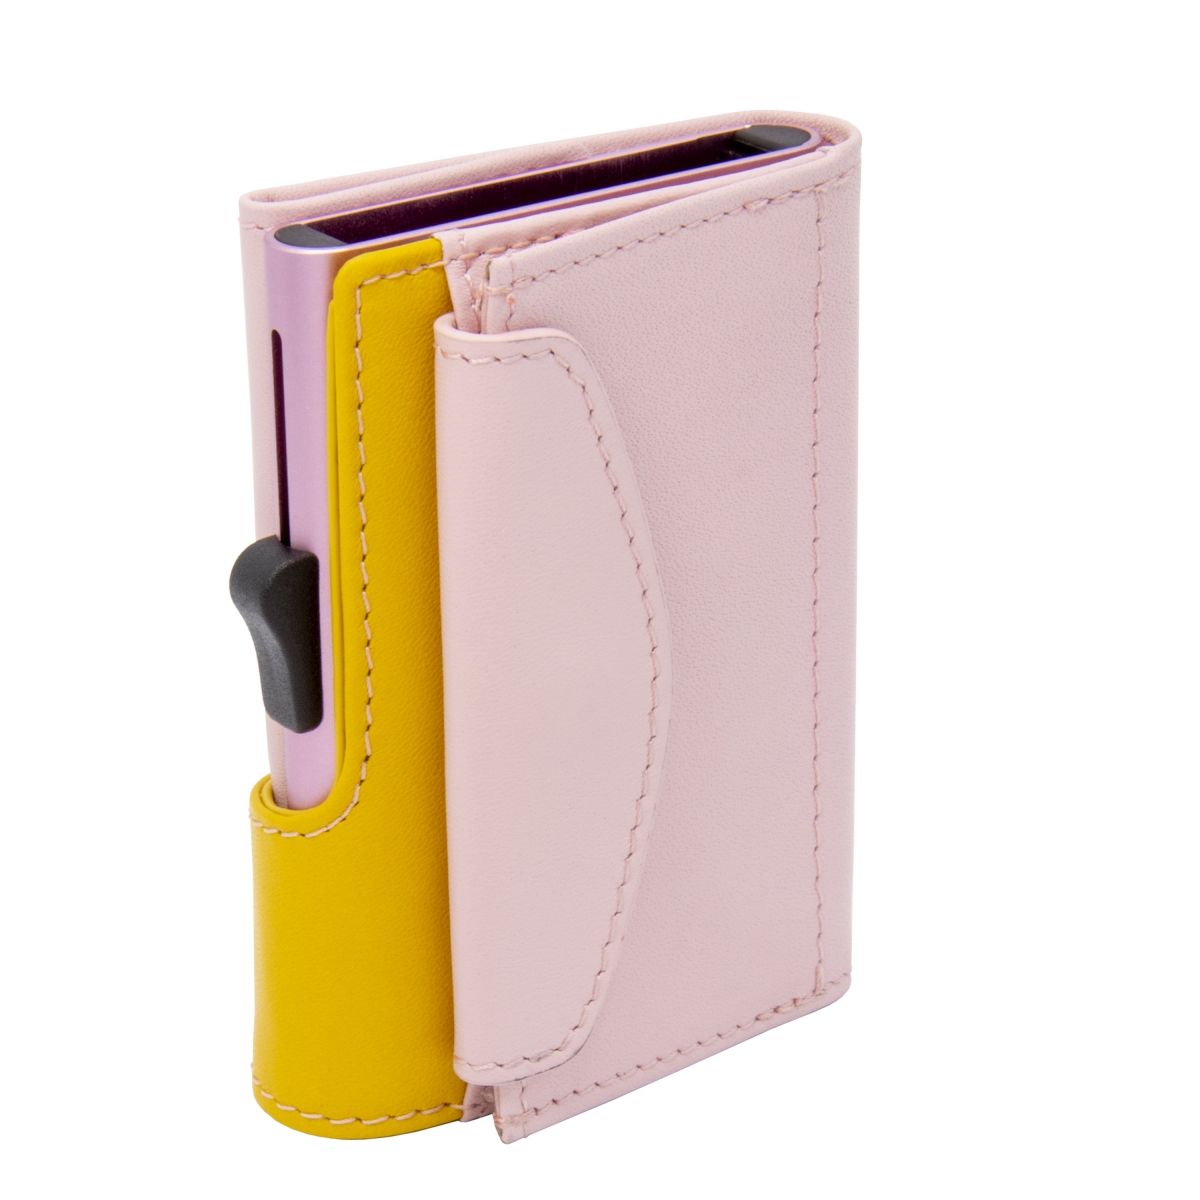 C-Secure XL Aluminum Wallet with Genuine Leather and Coins Pocket - Blush/Saffron